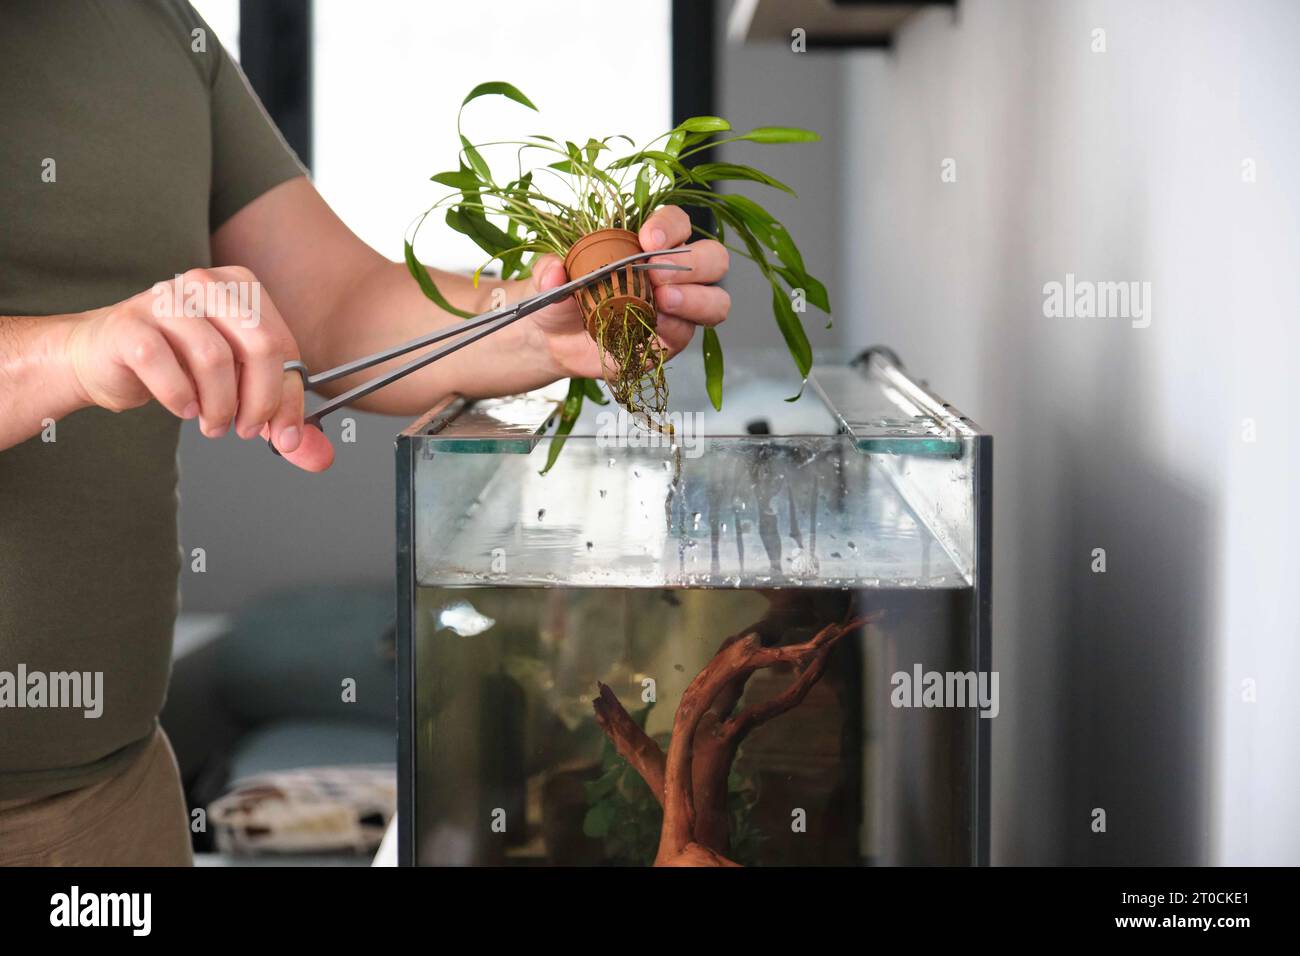 Man hands cutting the pot to plant new water plant, cryptocoryne x willisii, in aquarium at home. Stock Photo